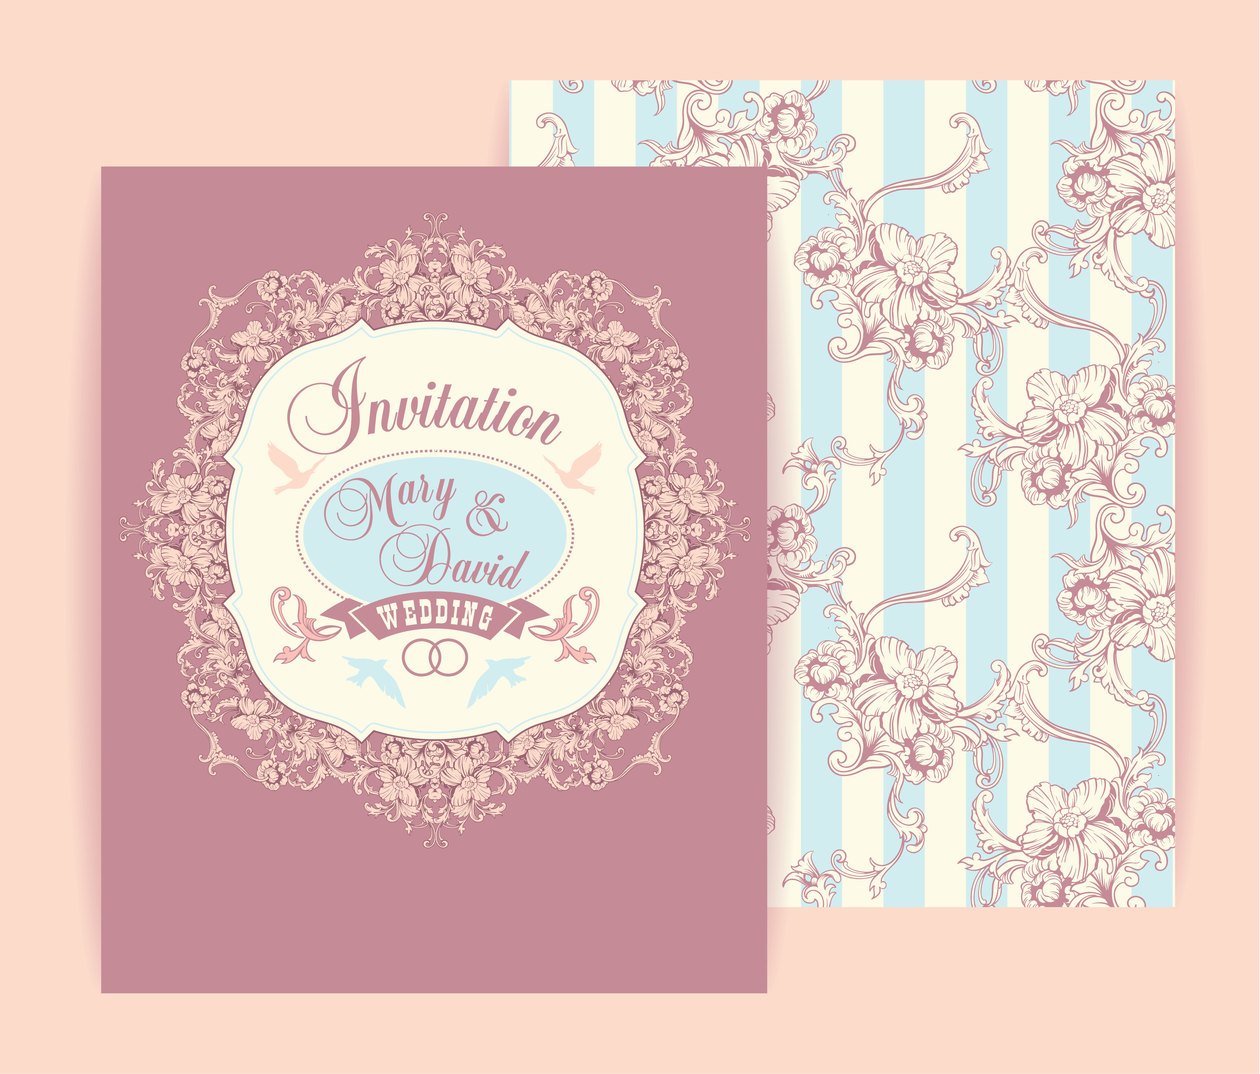 Wedding invitation cards with floral elements. Vector illustration. Photoshop brush